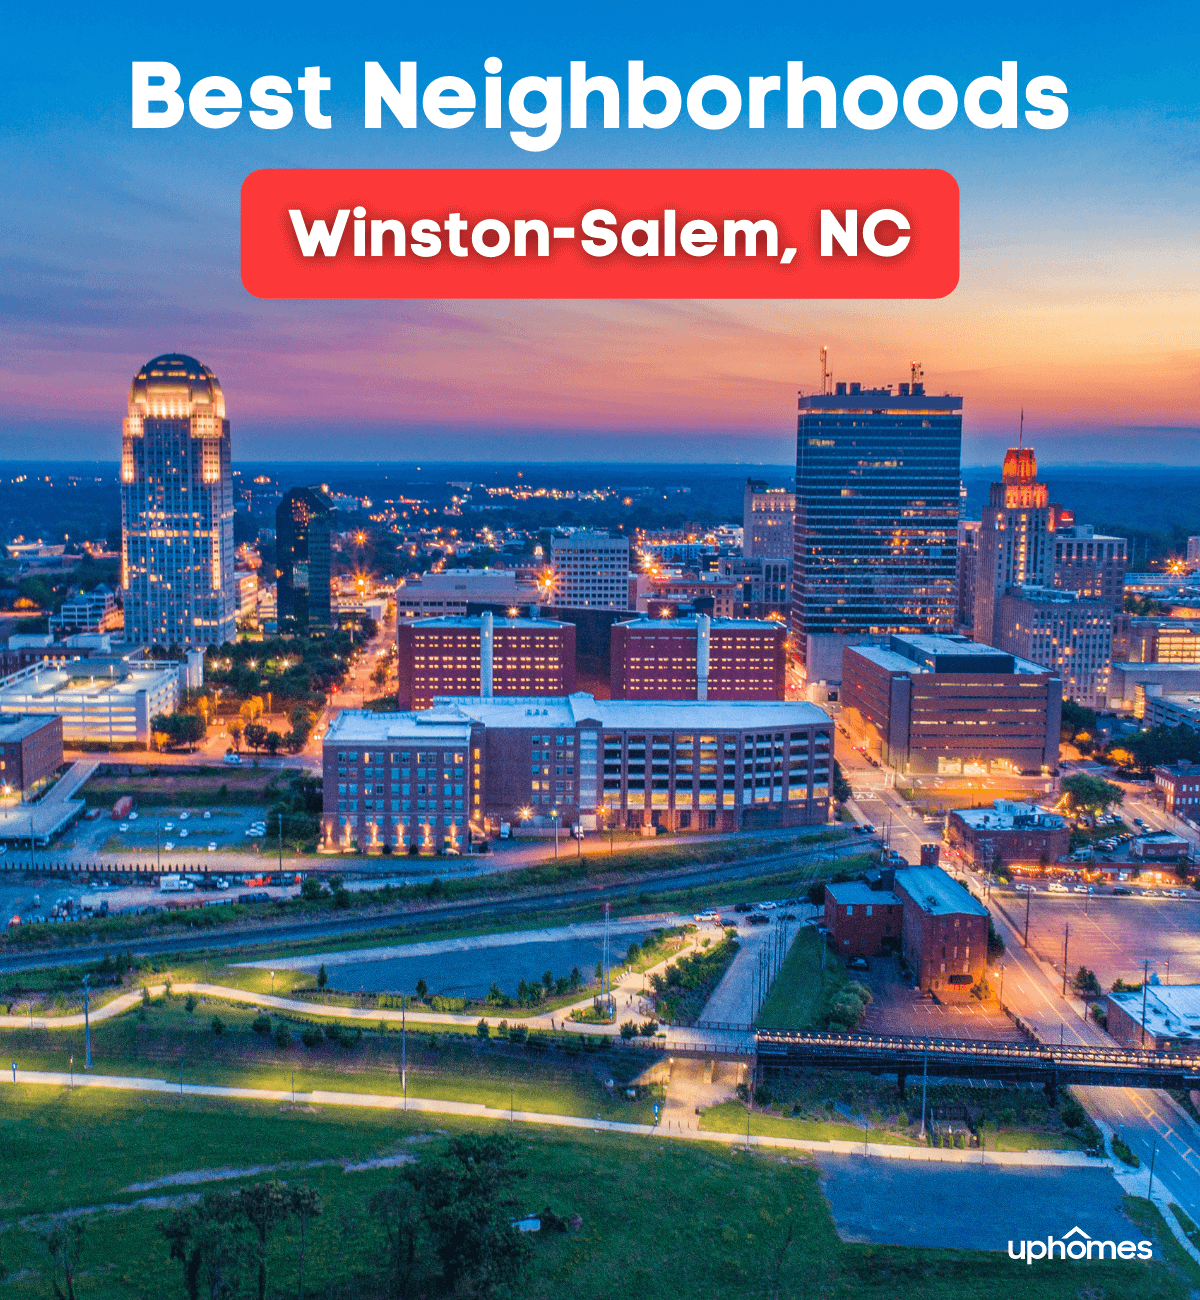 Best Neighborhoods in Winston-Salem, NC - What are the Best subdivisions in Winston-Salem for Families and Young Professionals